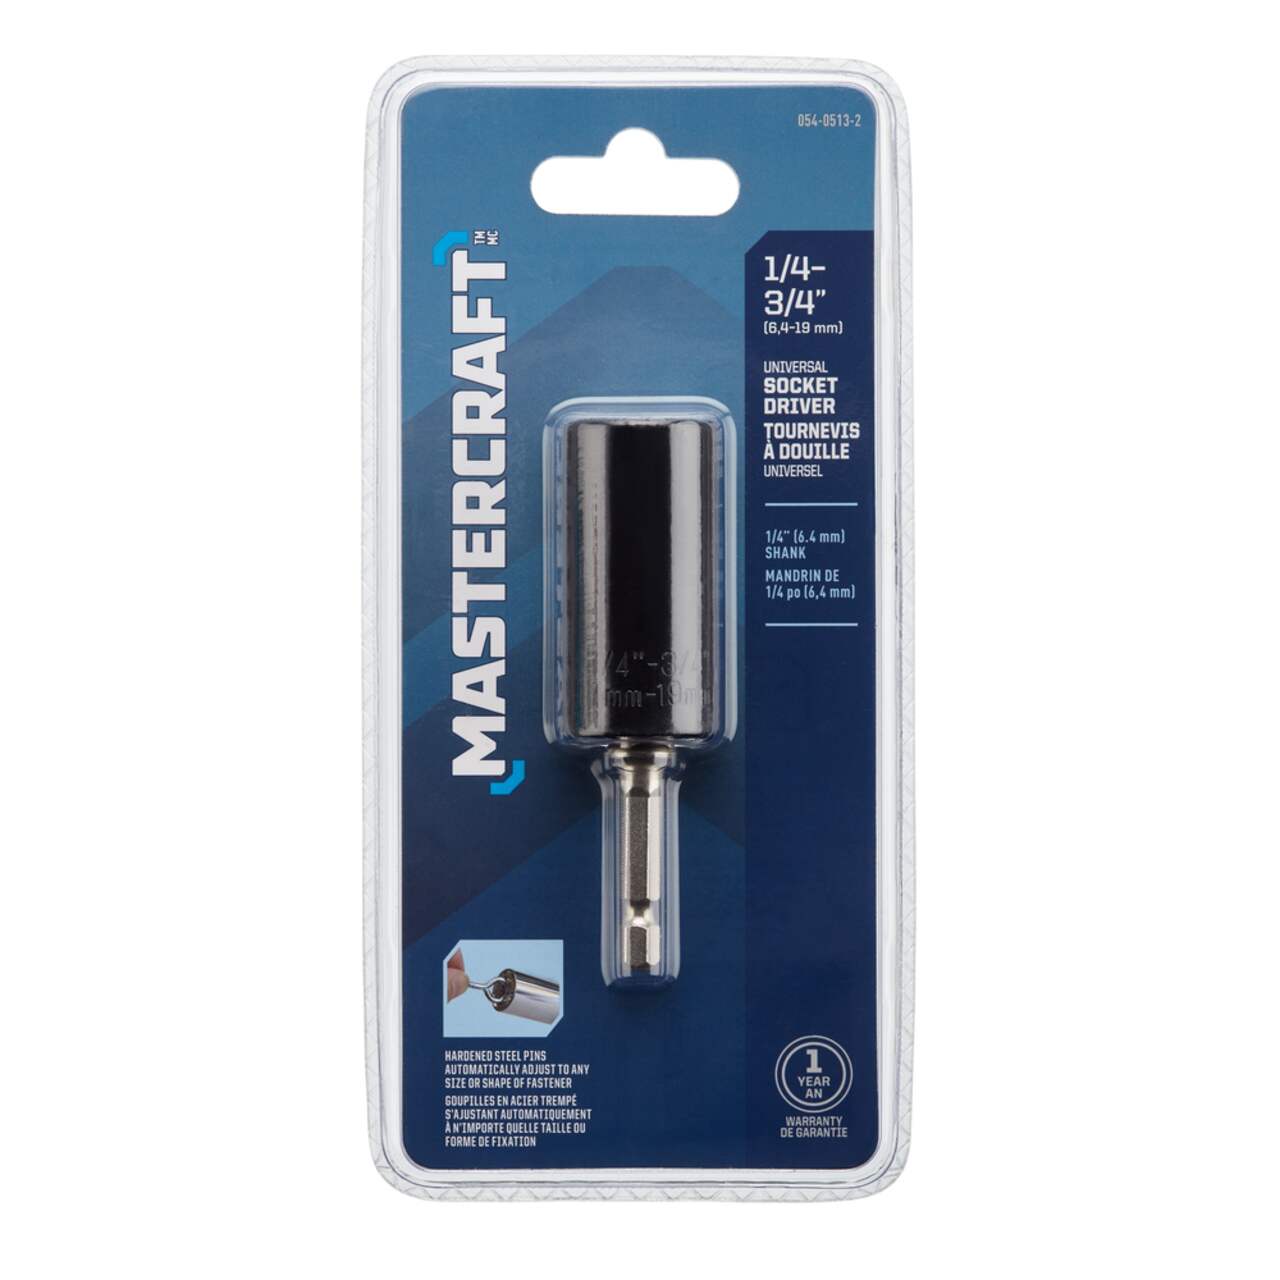 Mastercraft Universal Fit Socket Driver with Adaptor, 1/4-in to 3 ...